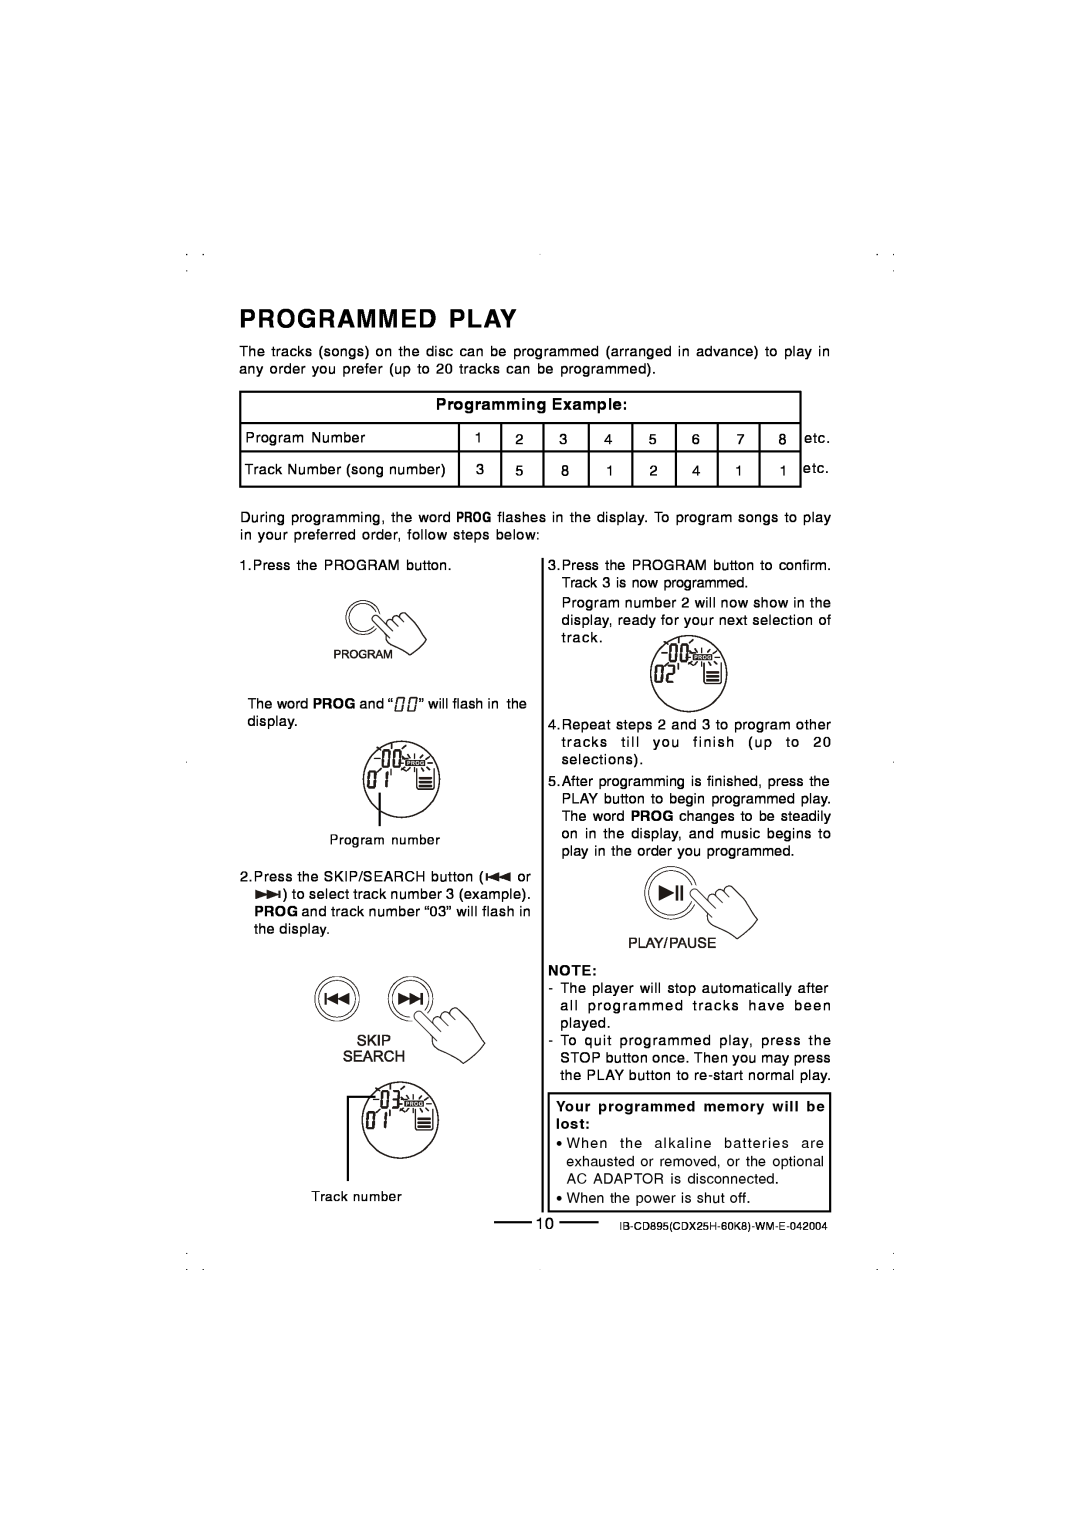 Lenoxx Electronics CD-895 manual Programmed Play, Programming Example, Your programmed memory will be lost 